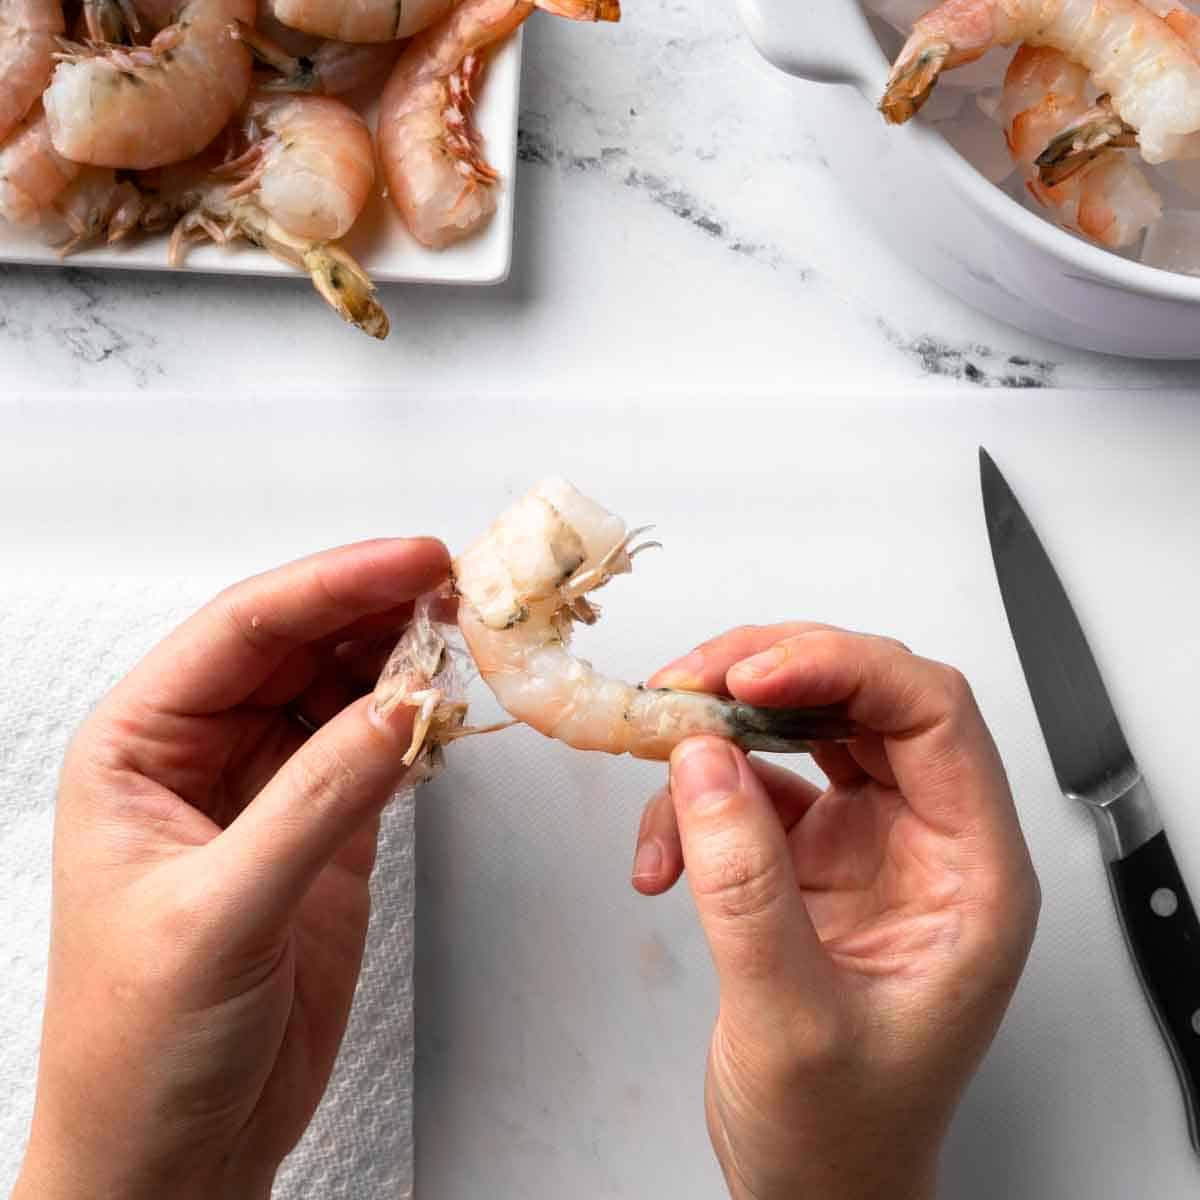 Pulling the shell off of the shrimp.